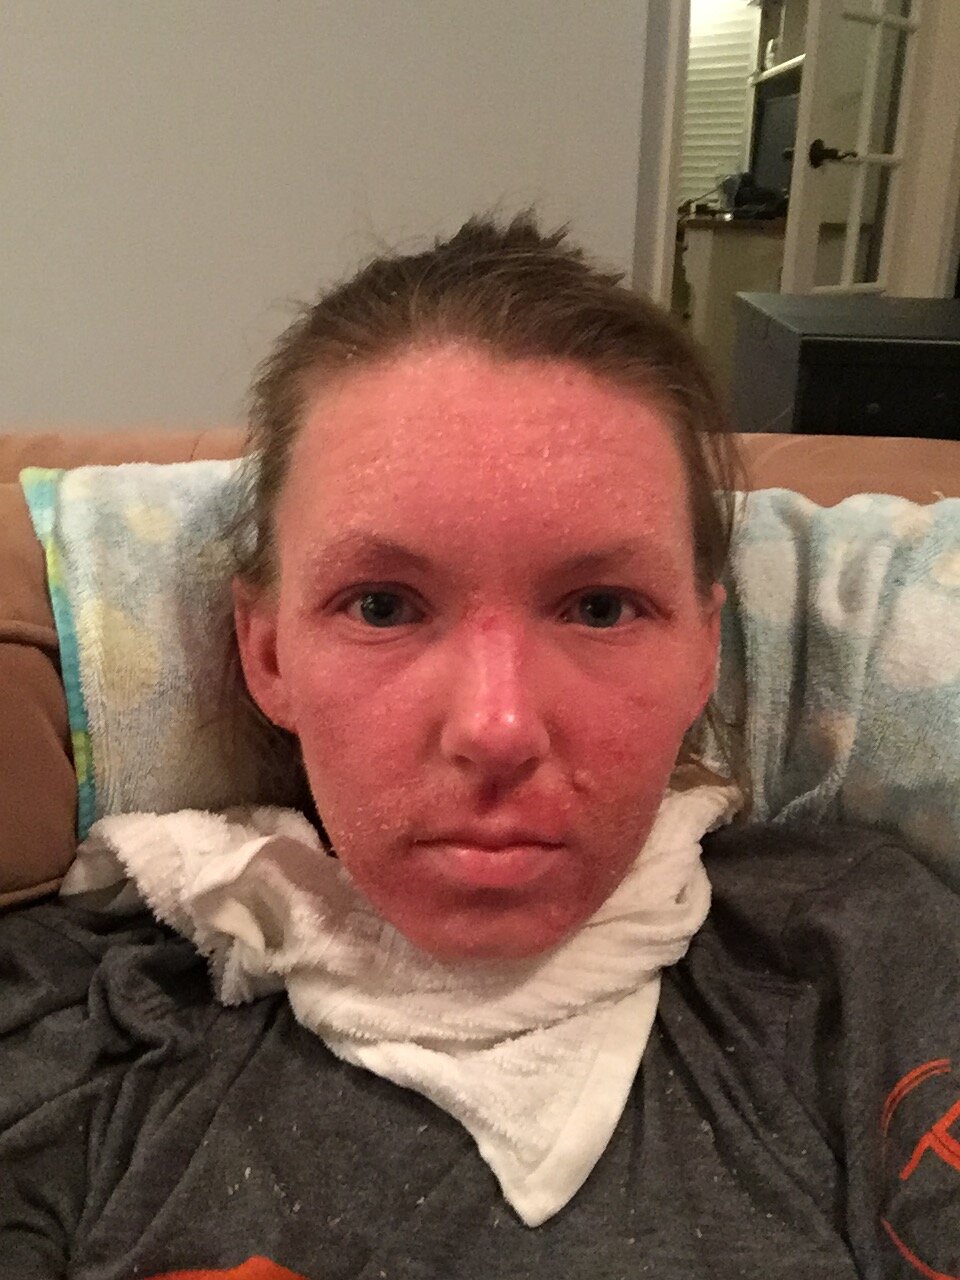 Jessica Morrison - After the Hospital Face December 2016 - Topical Steroid Withdrawal.jpg